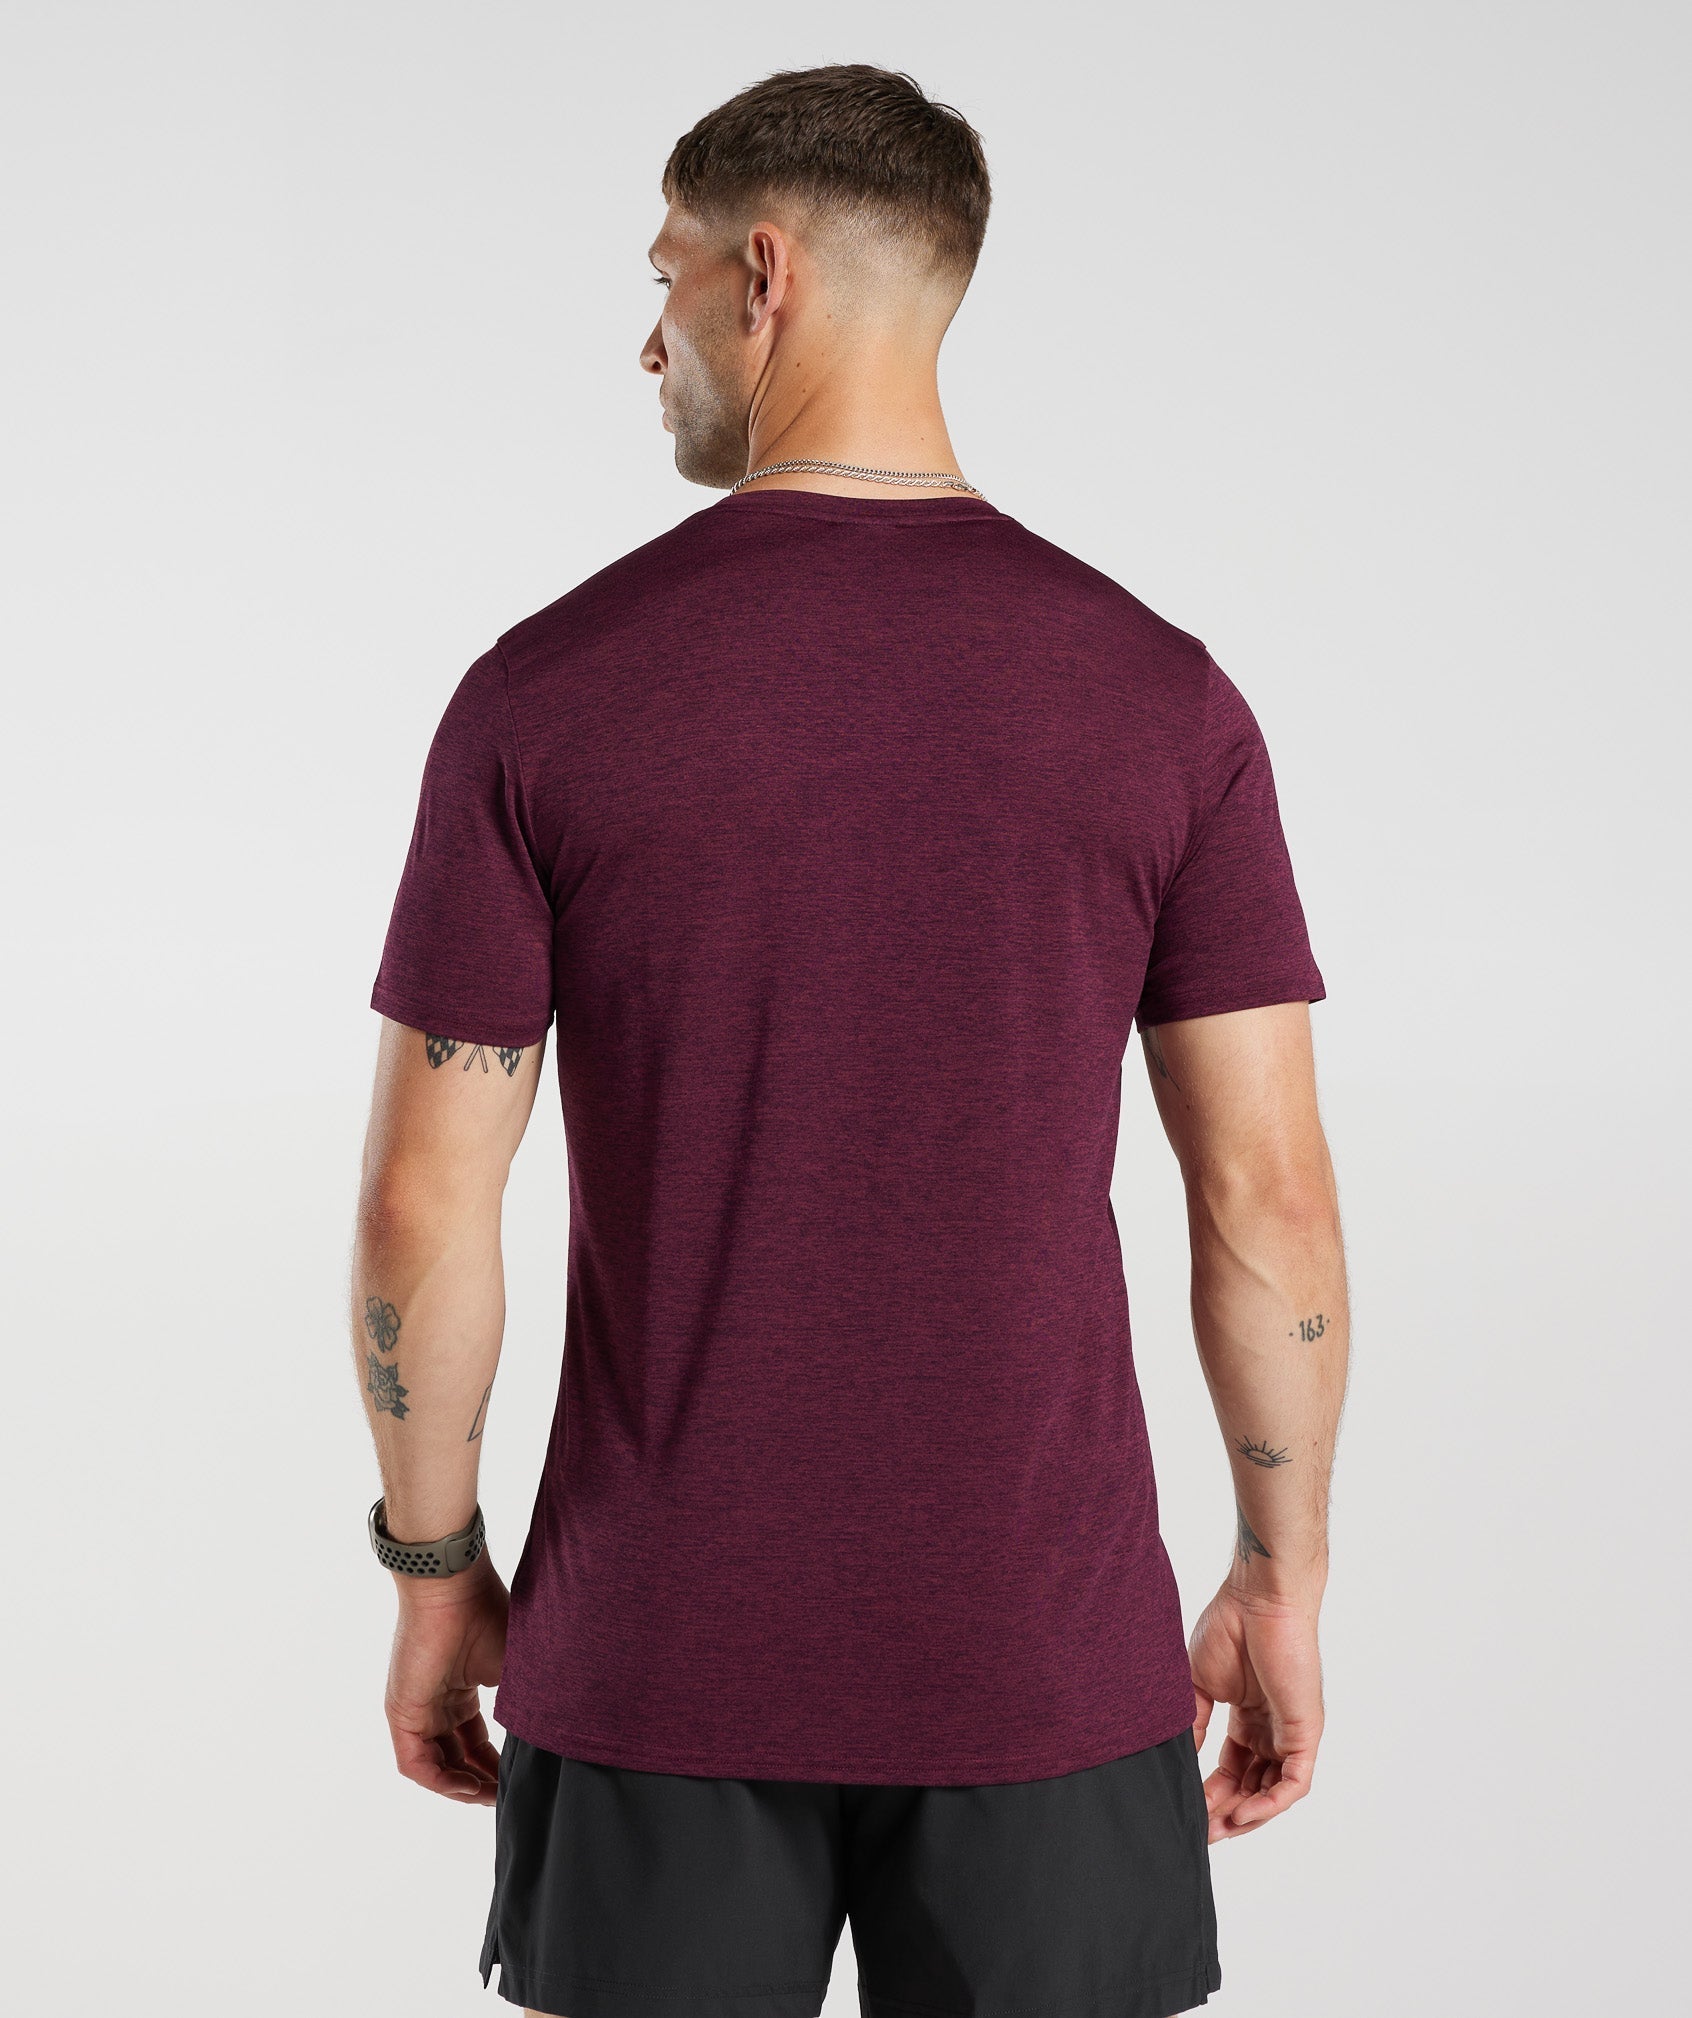 Arrival Marl T-Shirt in Plum Pink/Plum Brown Marl - view 2